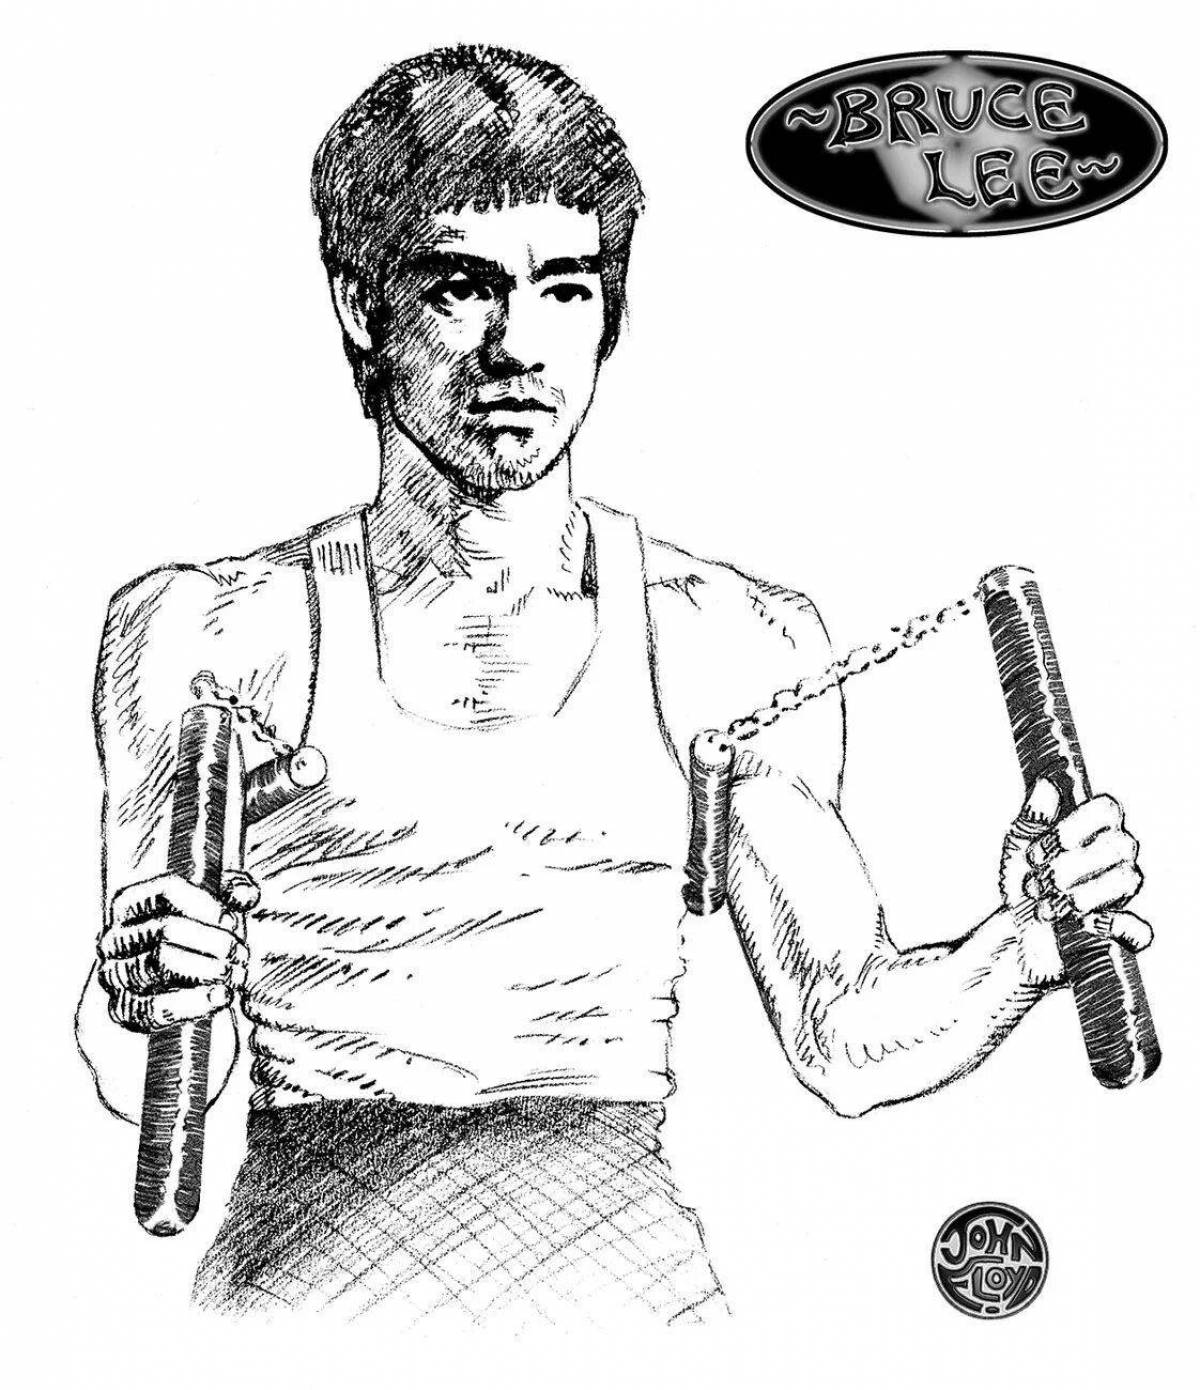 Coloring book dazzling bruce lee